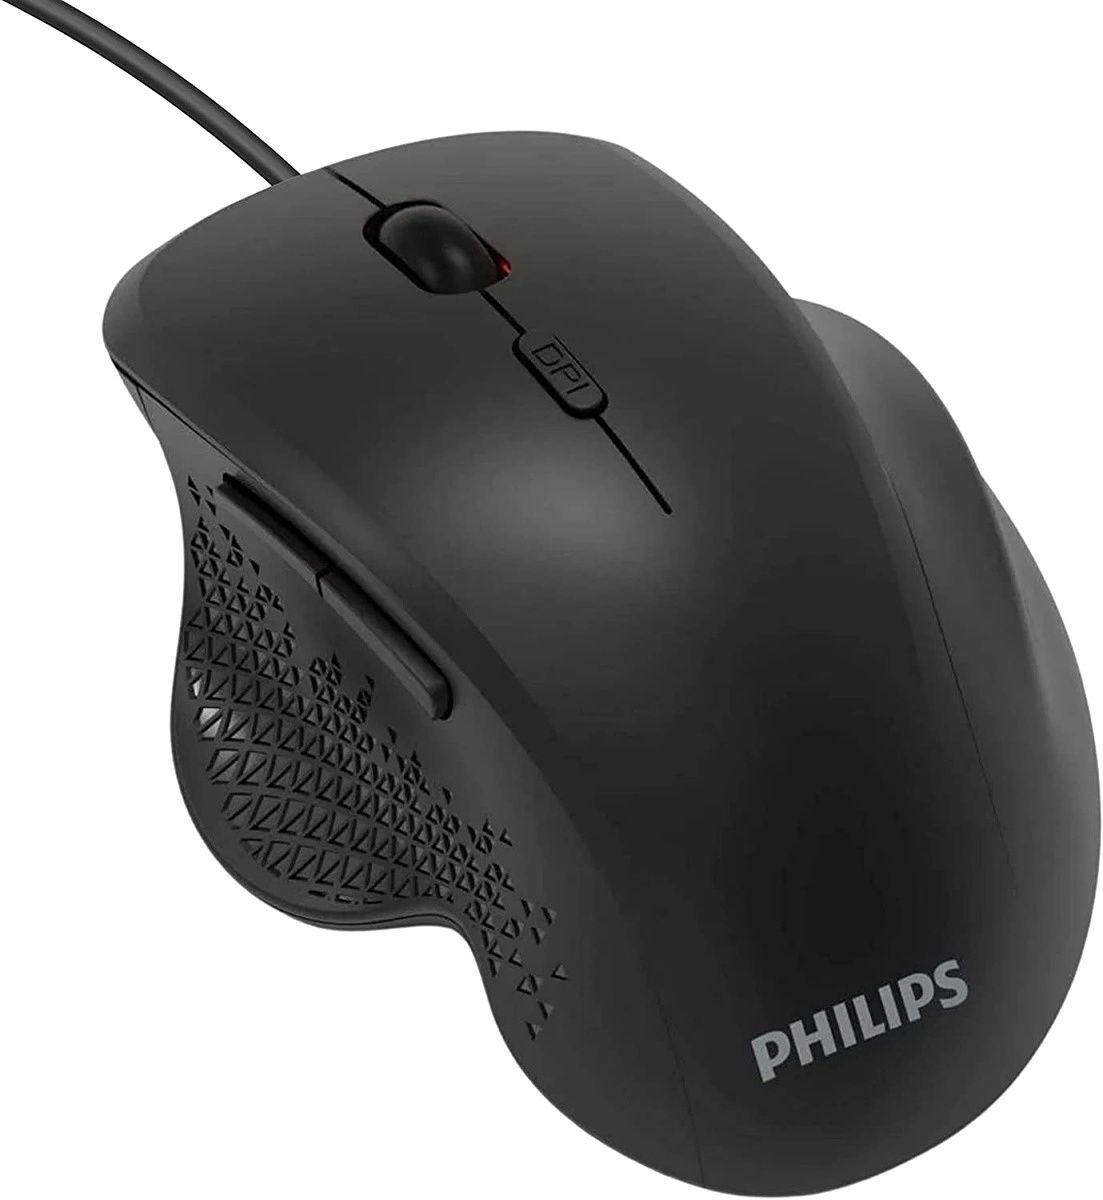 This wired mouse connects to your Mac through the USB Type-A port. It has six programmable buttons and four adjustable DPI levels.